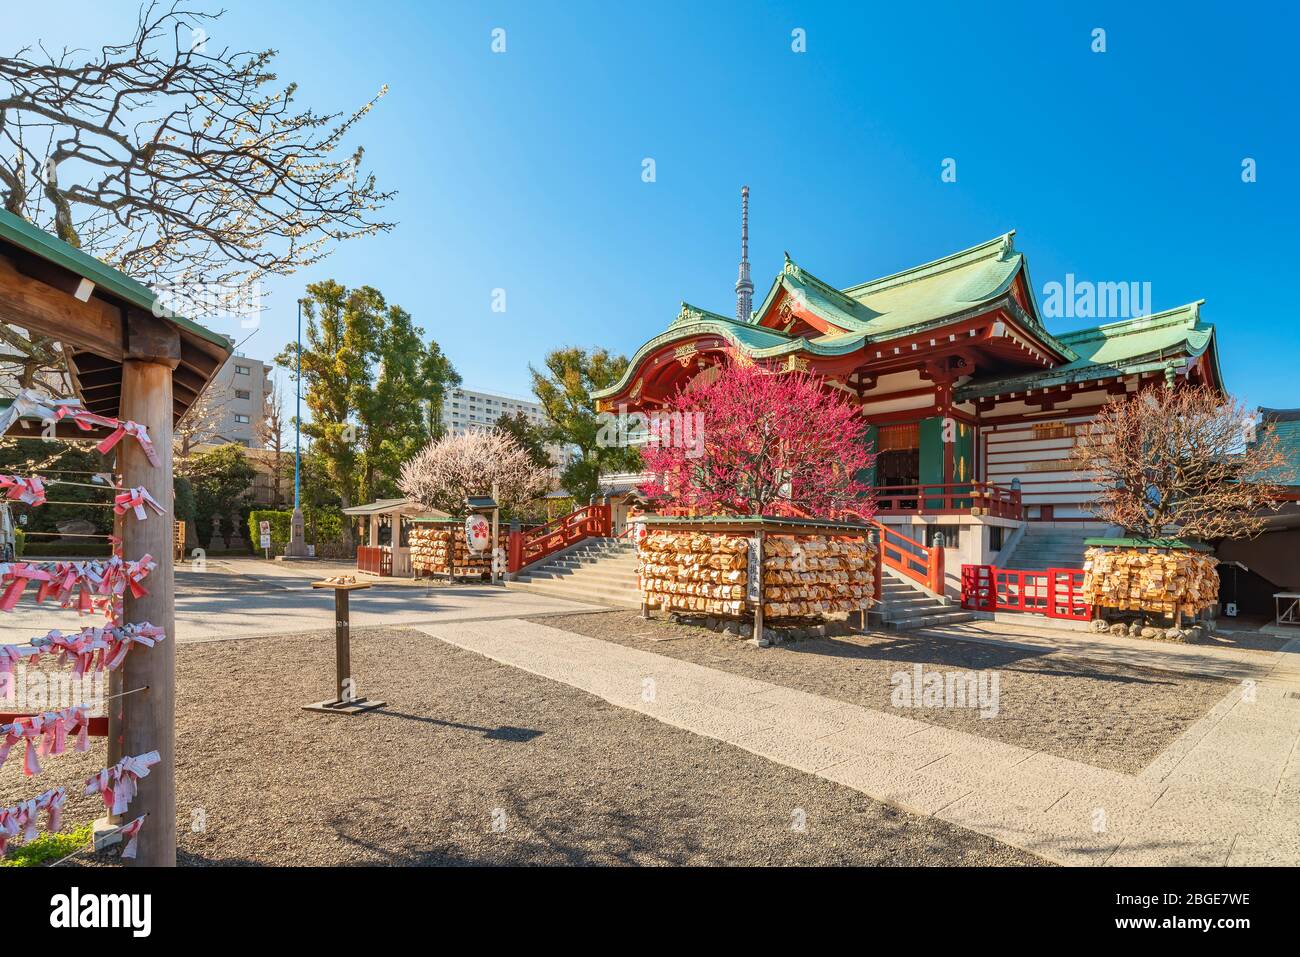 tokyo, japan - march 08 2020: Kameido Tenjin shrine dedicated to Sugawara no Michizane during the plum festival with the Tokyo Skytree tower in the ba Stock Photo